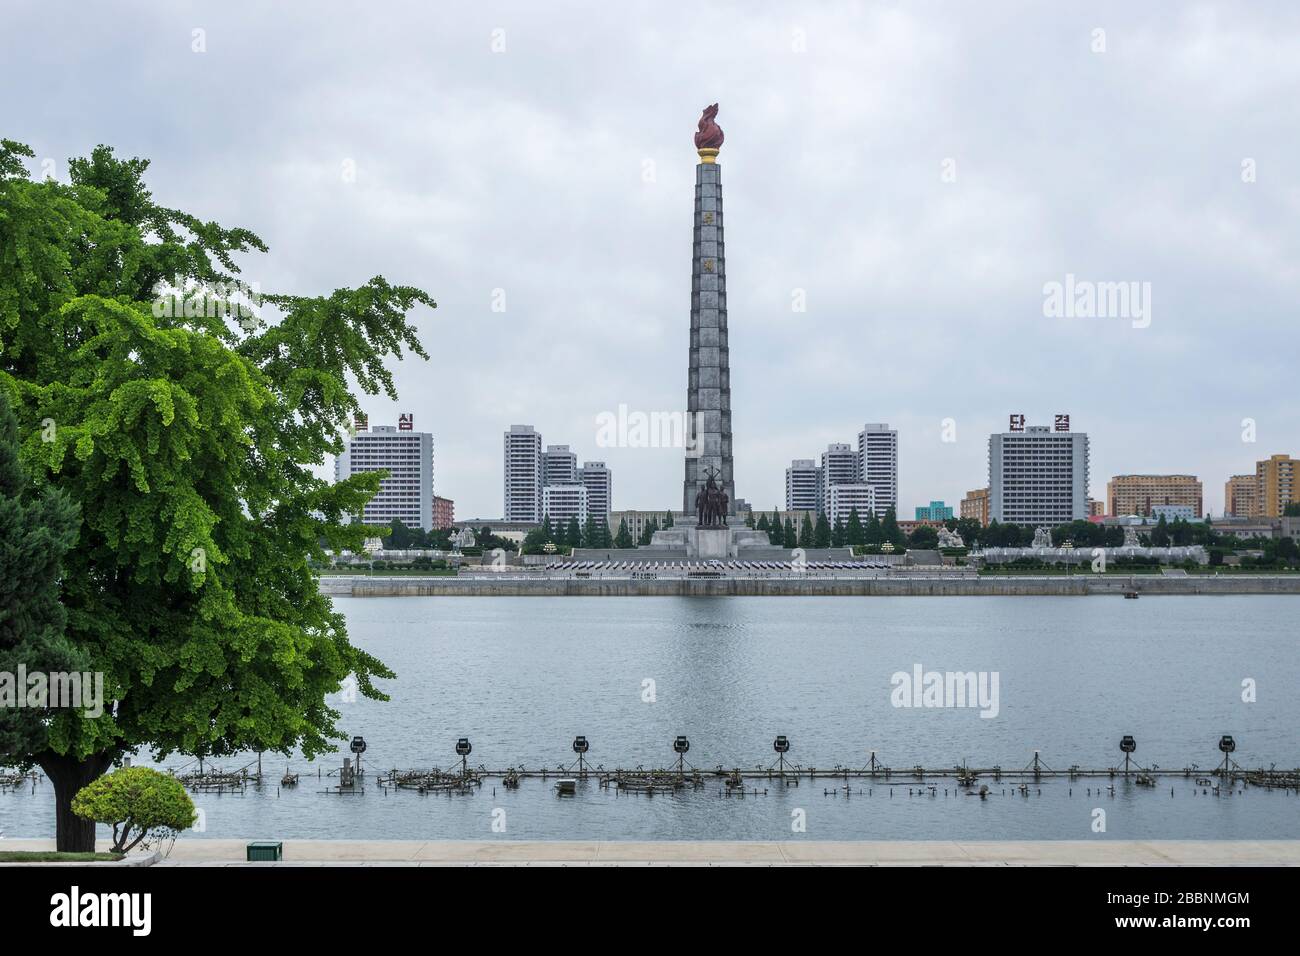 The Tower of Juche Idea statue in central Pyongyang, Pyongyang, North Korea Stock Photo